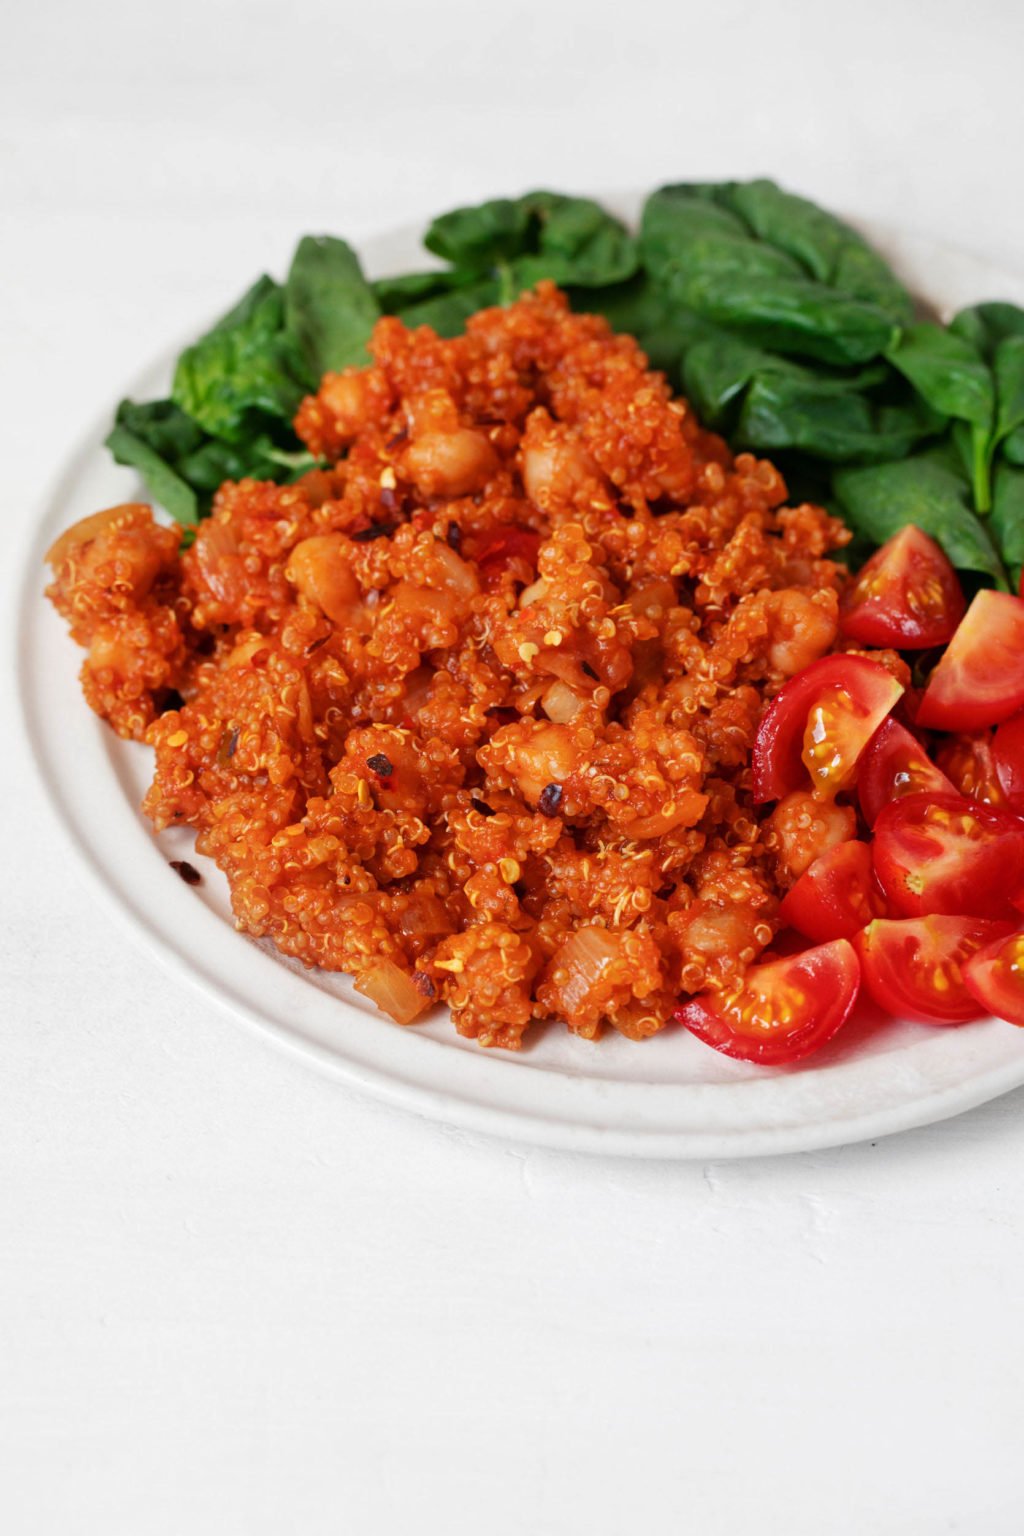 A white, round plate is topped with a tomato-based quinoa and chickpea dish, cherry tomatoes, and baby spinach.